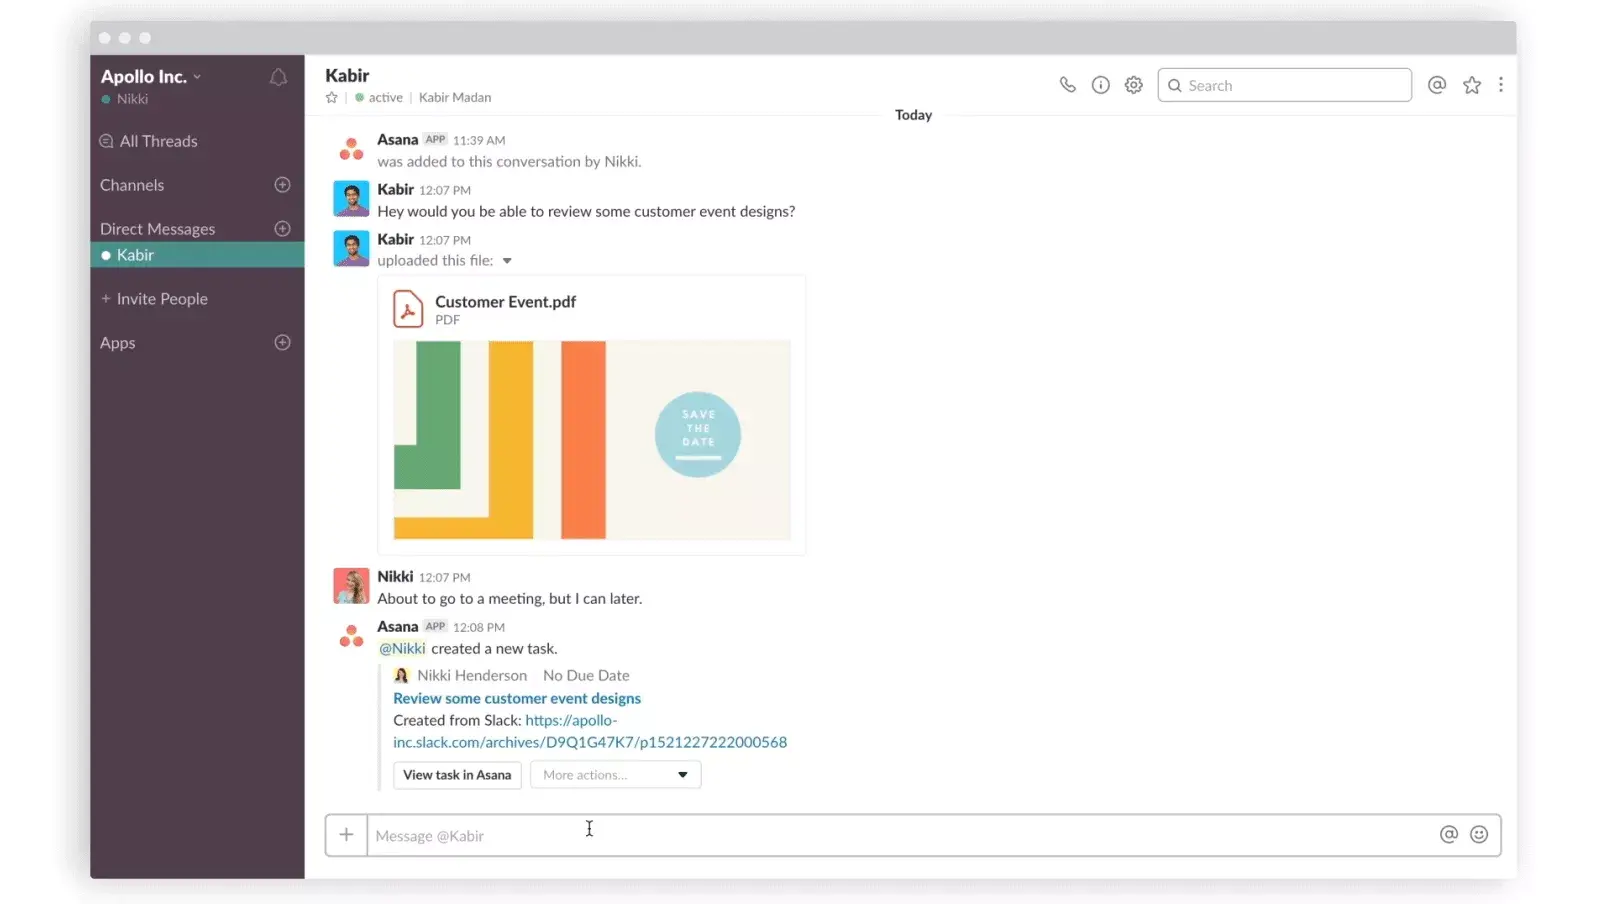 Complete or edit Asana tasks from within Slack